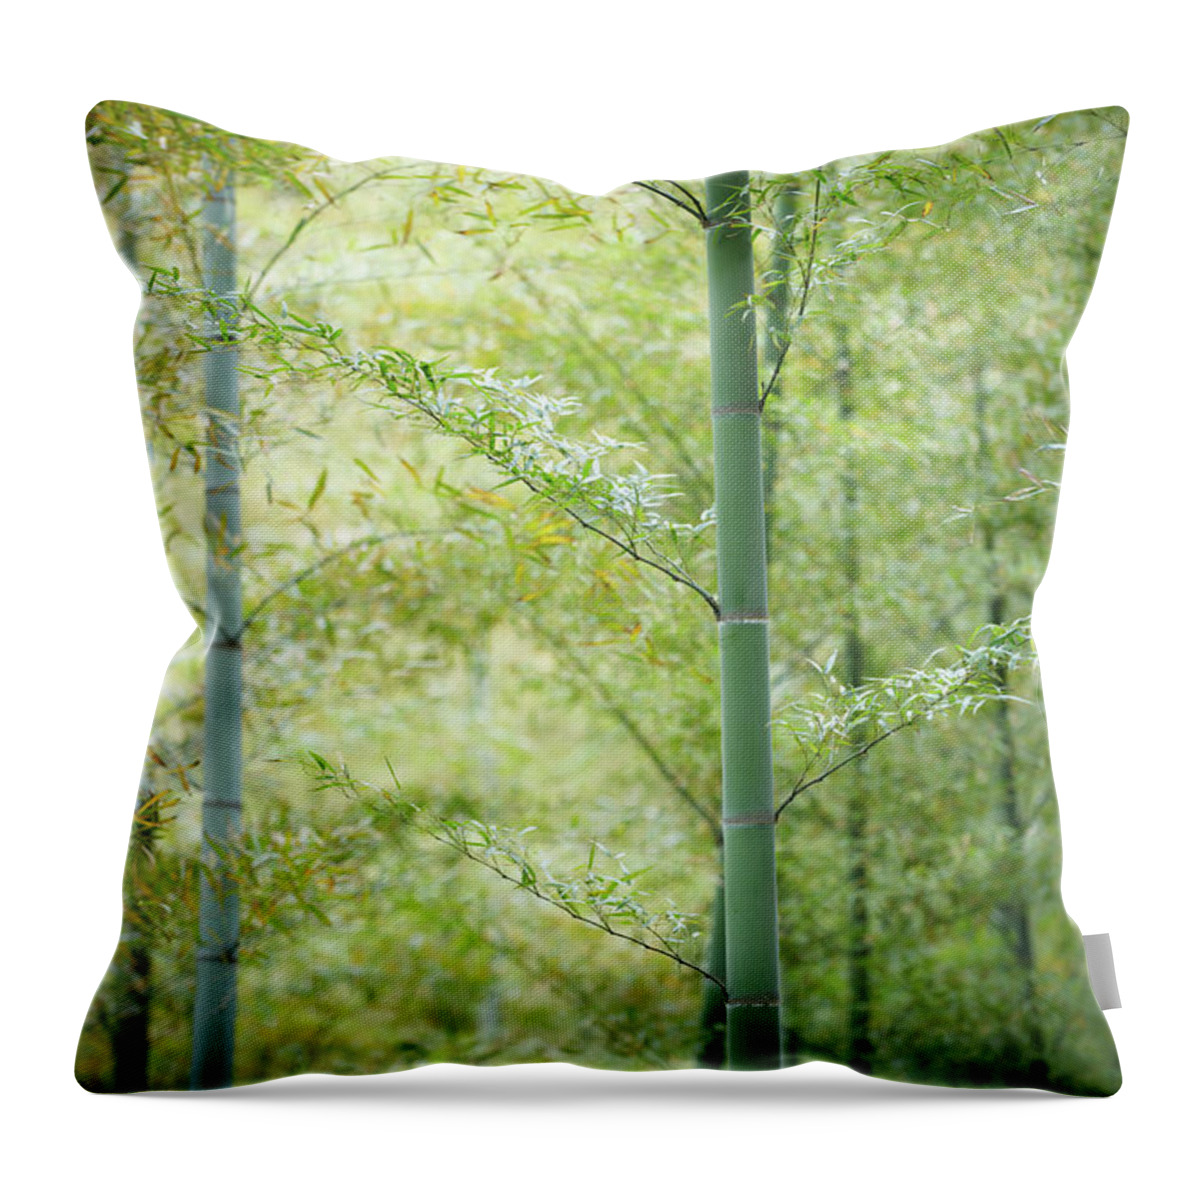 Tropical Rainforest Throw Pillow featuring the photograph Spring In Bamboo Forest by Sandsun